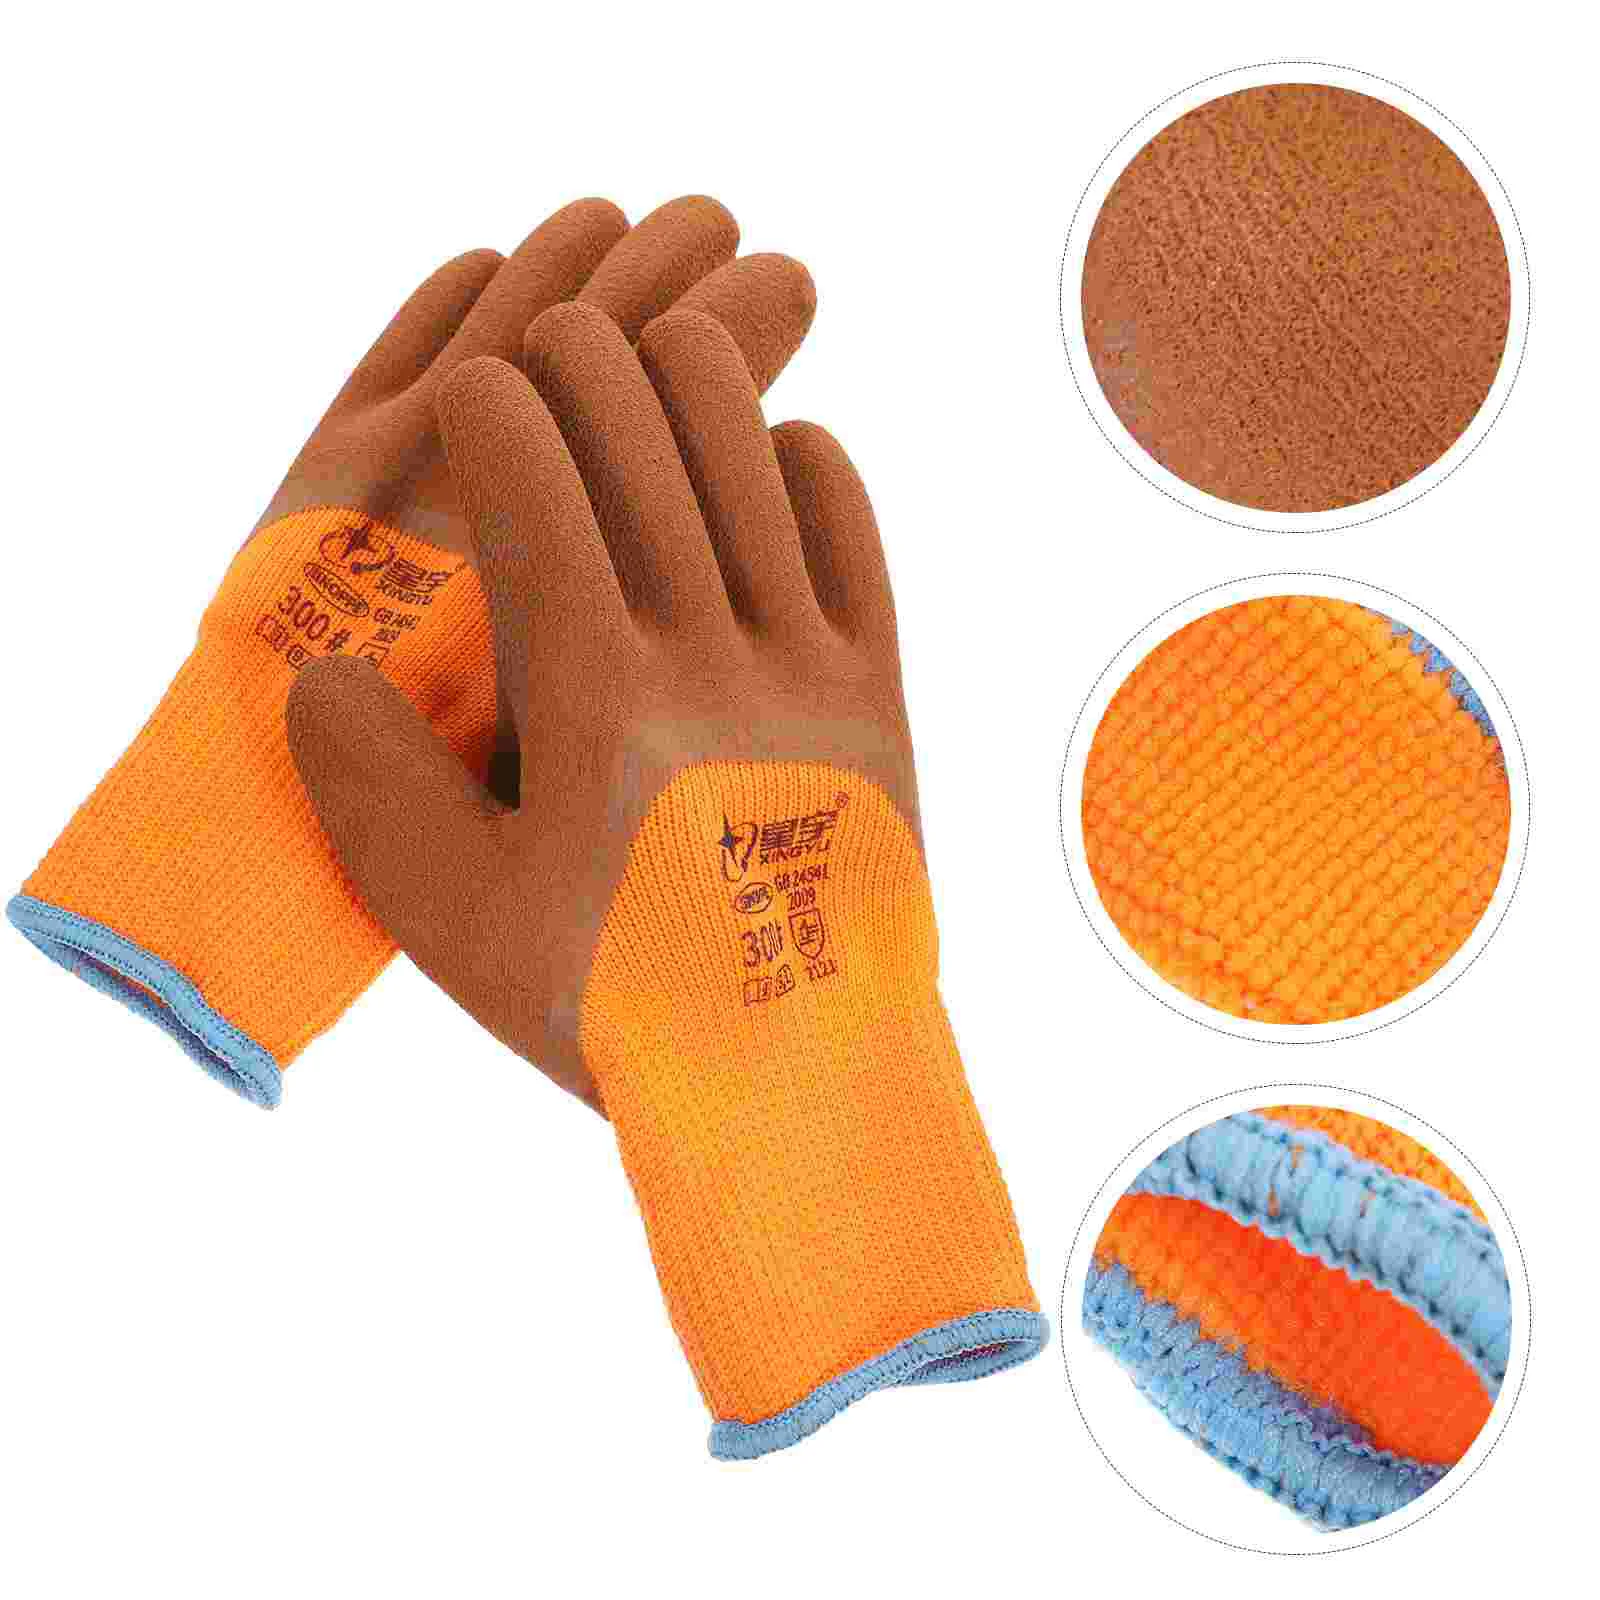 

Gloves Training Proof Grooming Hamster Bite Pet Cat Glove Anti Bird Puncture Thickening Animal Scratch Handling Protection